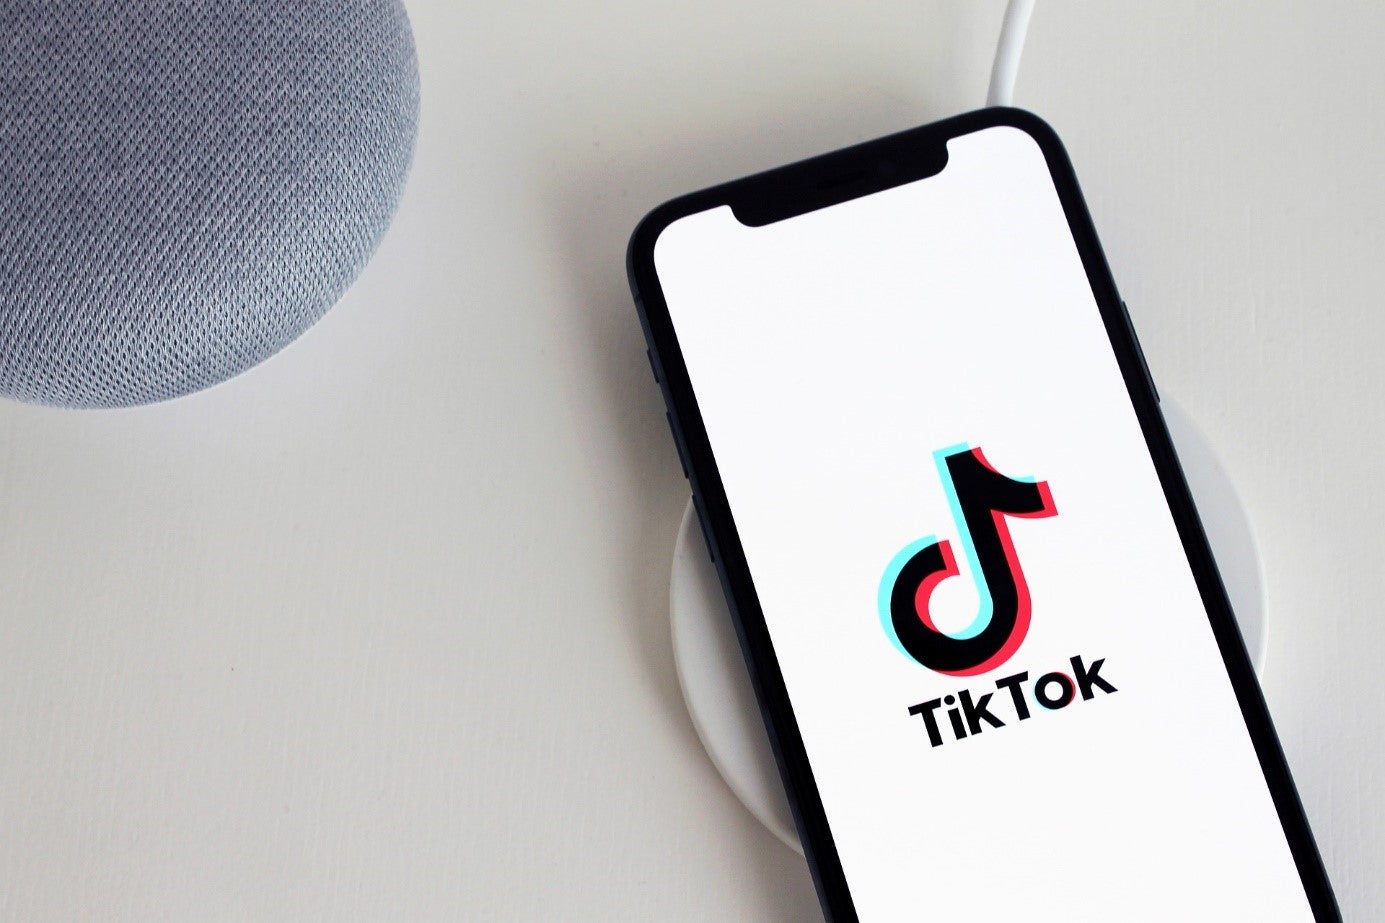 Buy Tik Tok followers: understand everything about this practice